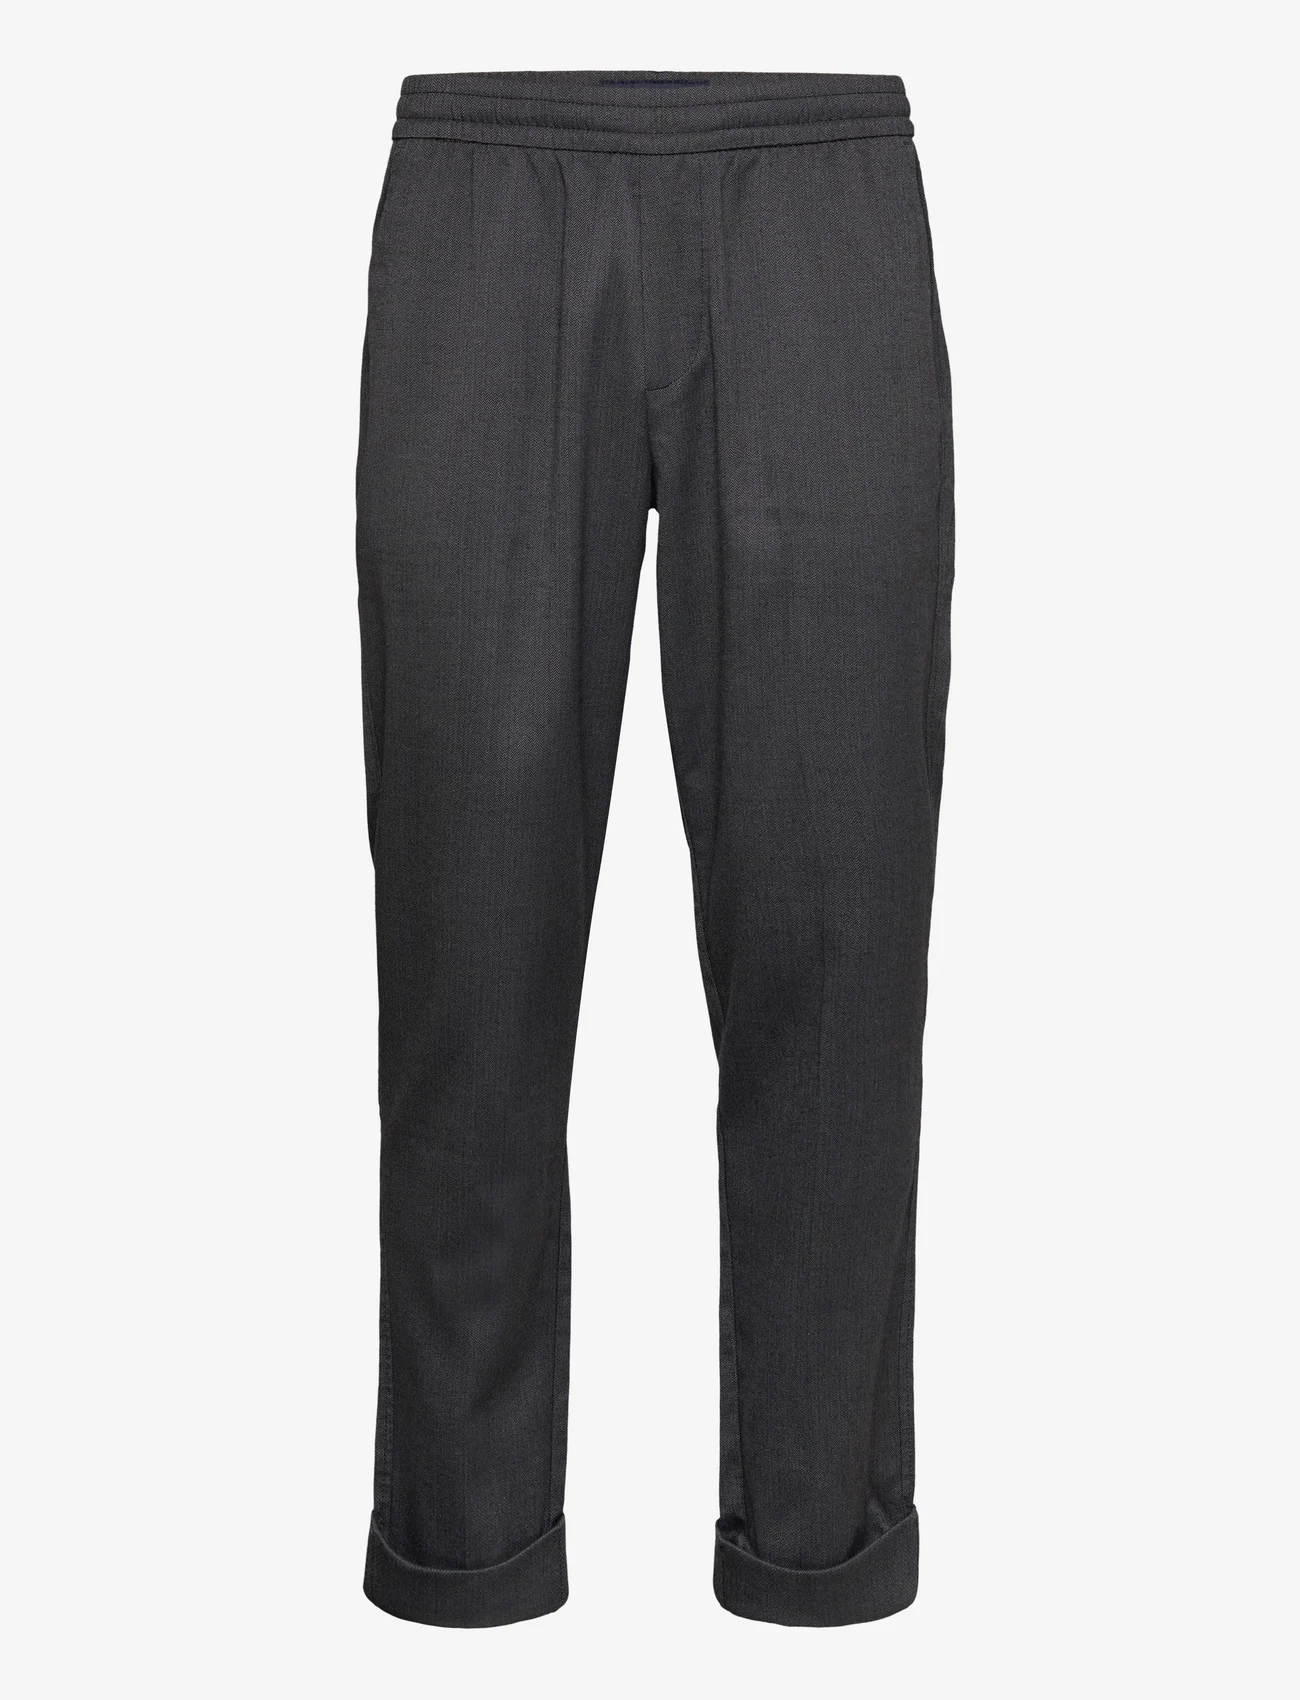 Abercrombie & Fitch - ANF MENS PANTS - rennot housut - charcoal texture - 0